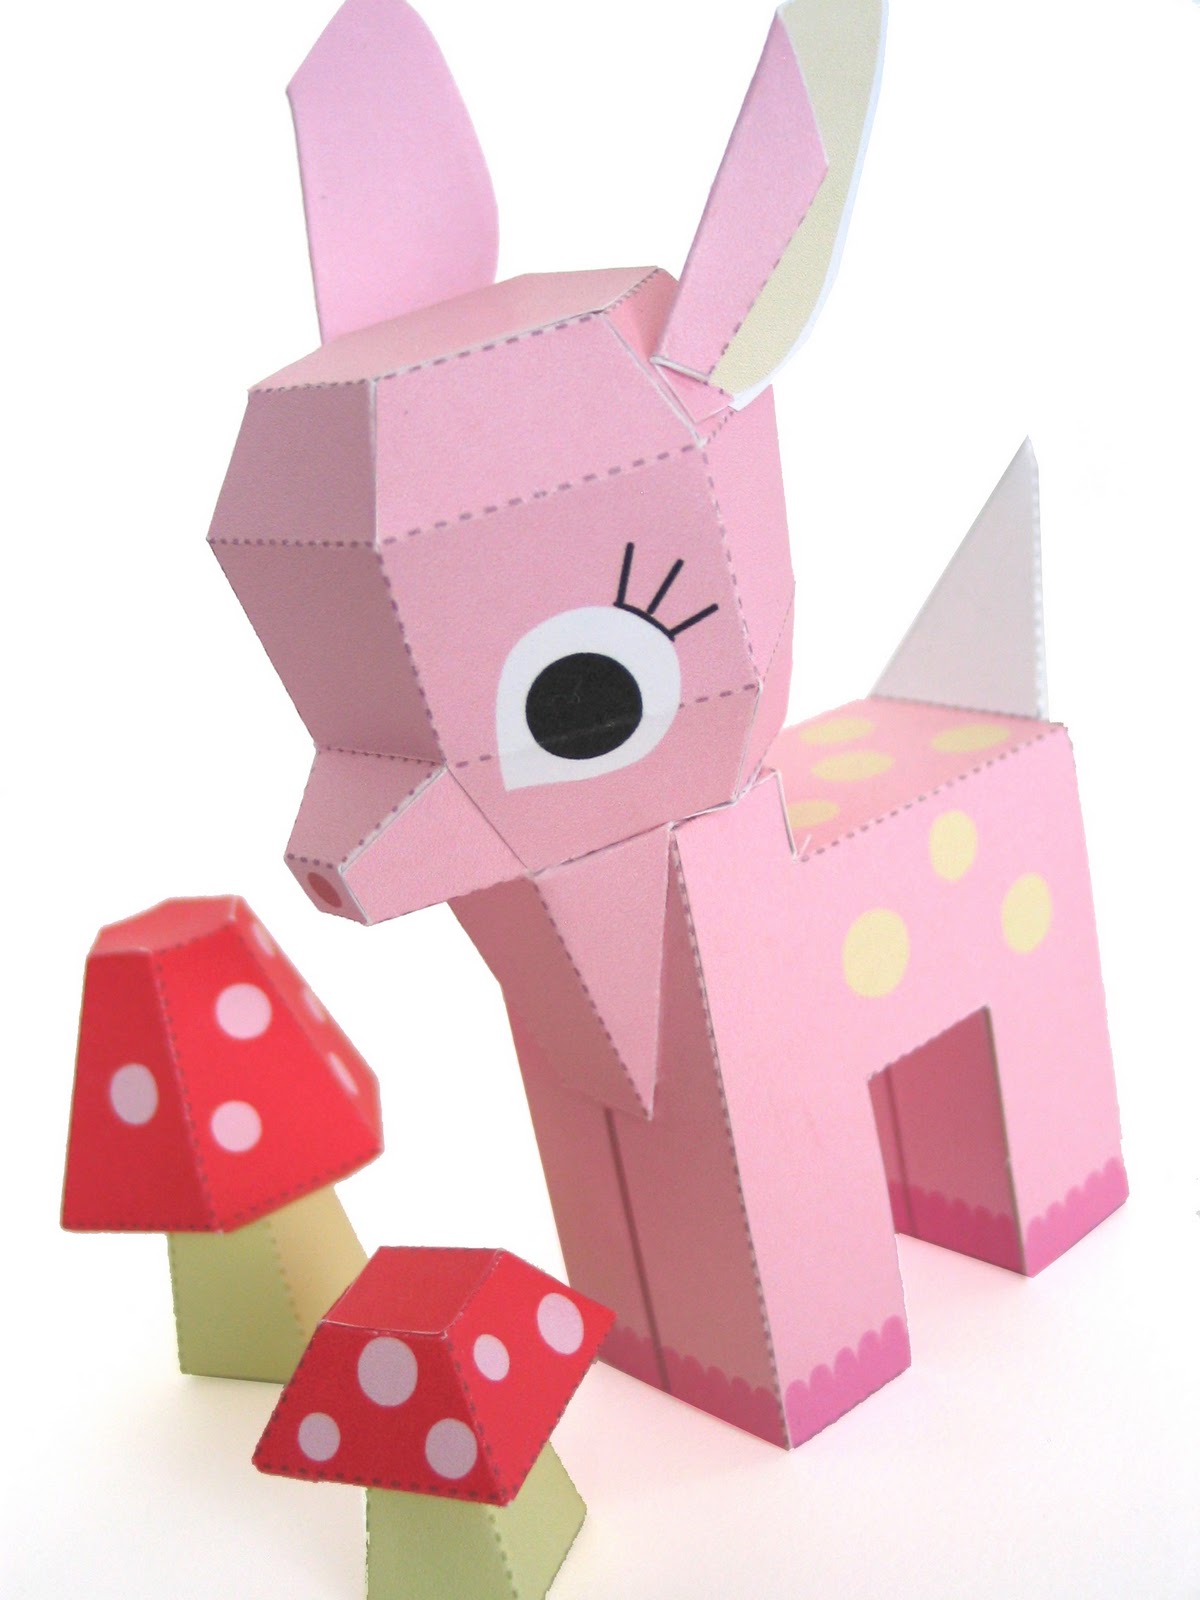 6-best-images-of-free-printable-cute-paper-toys-cute-animal-paper-toy